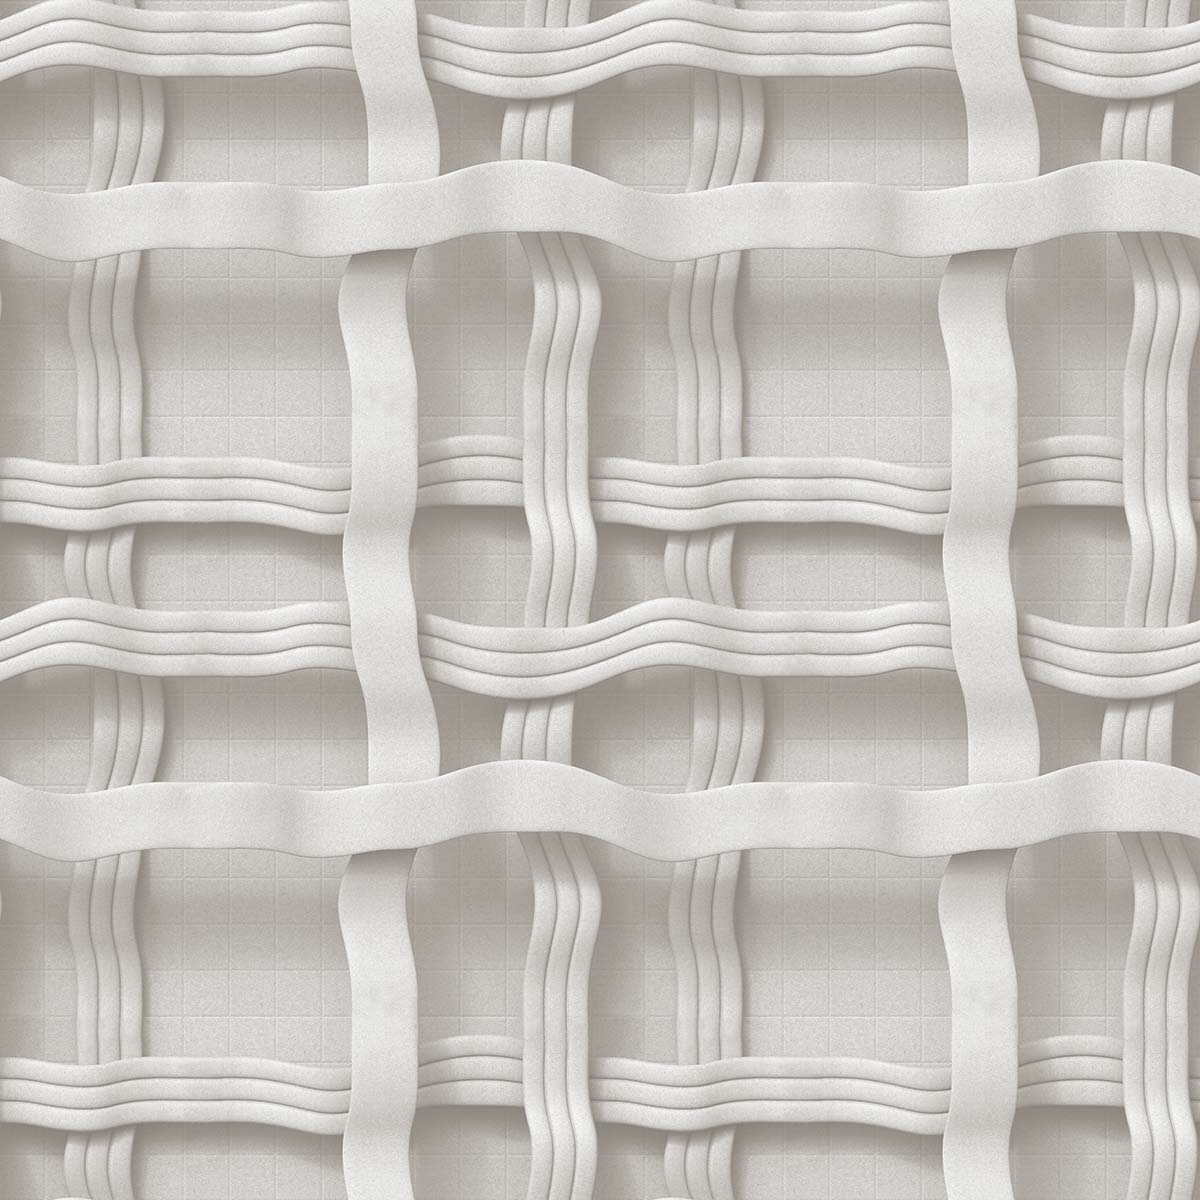 A white woven pattern on a white surface